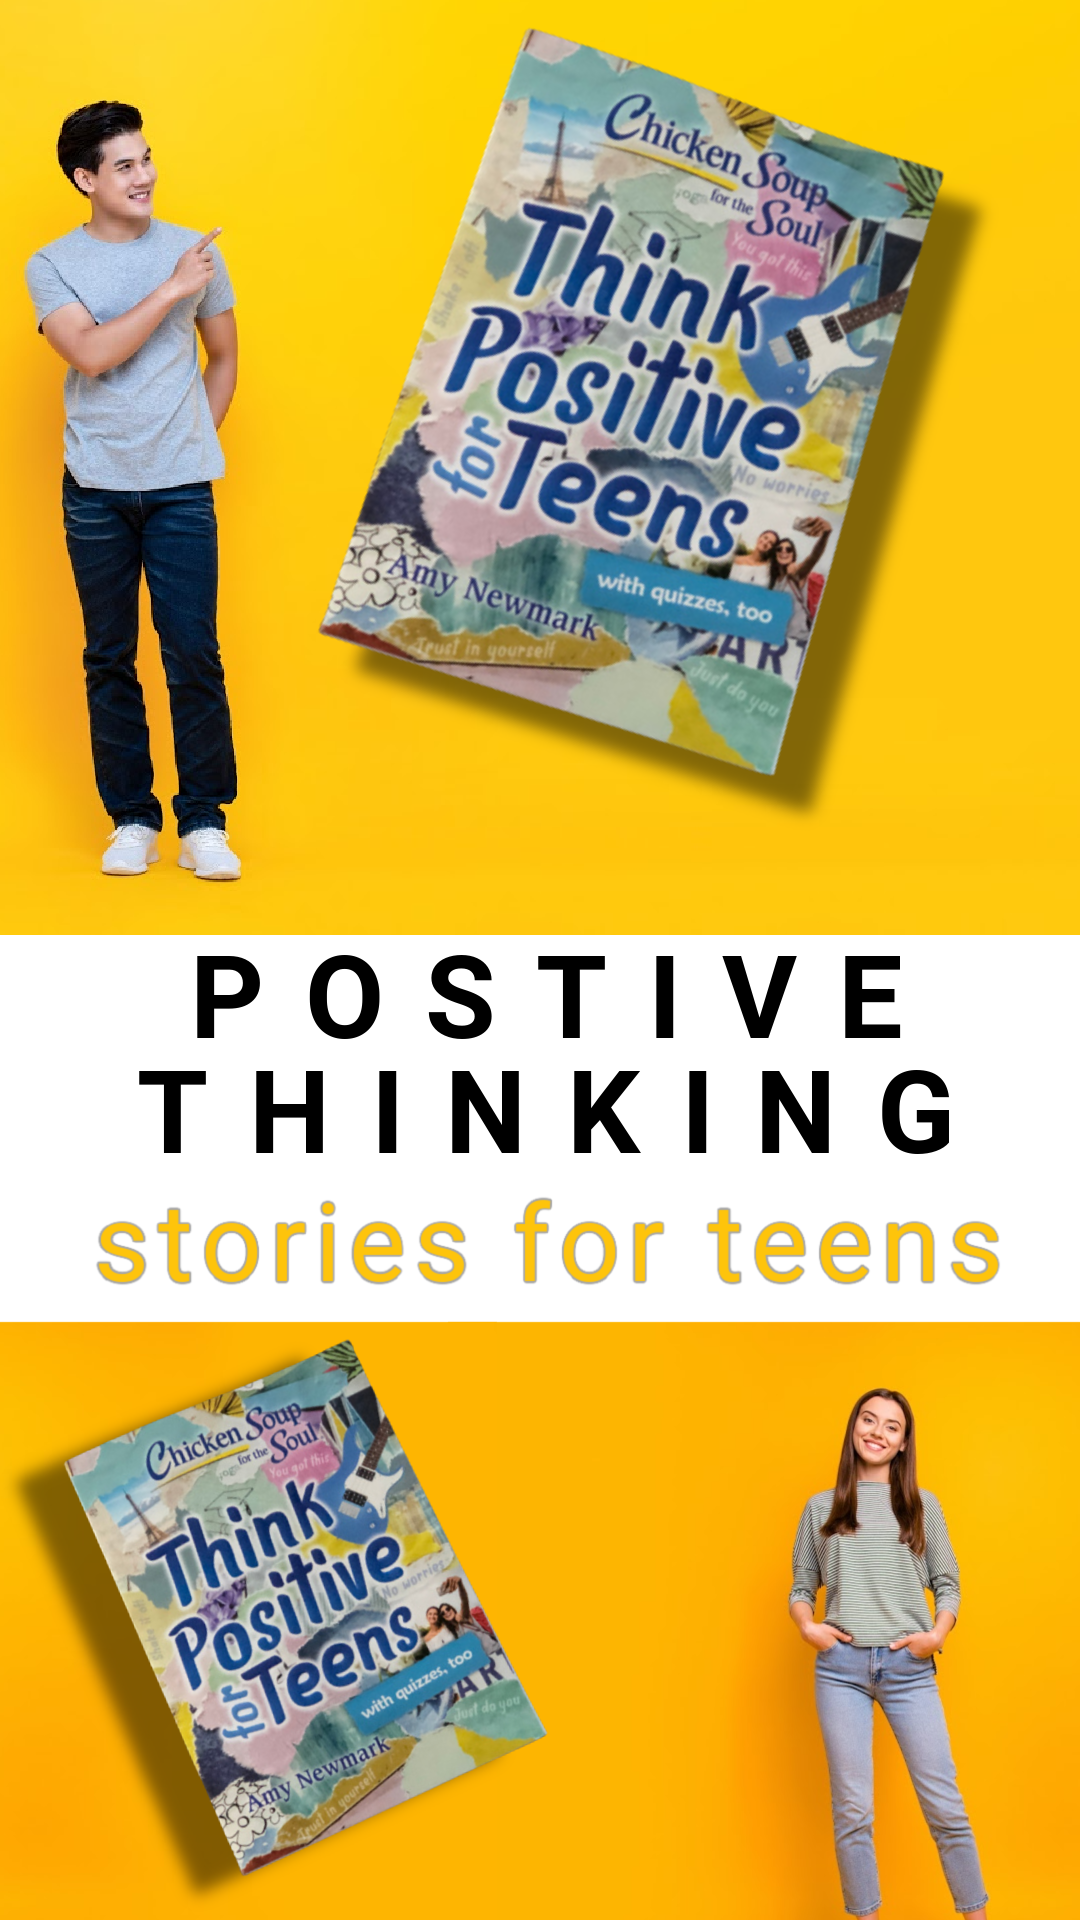 Chicken Soup for the Soul: Think Positive for Teens! This book is filled with stories of inspiration from teenagers. For teens, by teens who have been there.